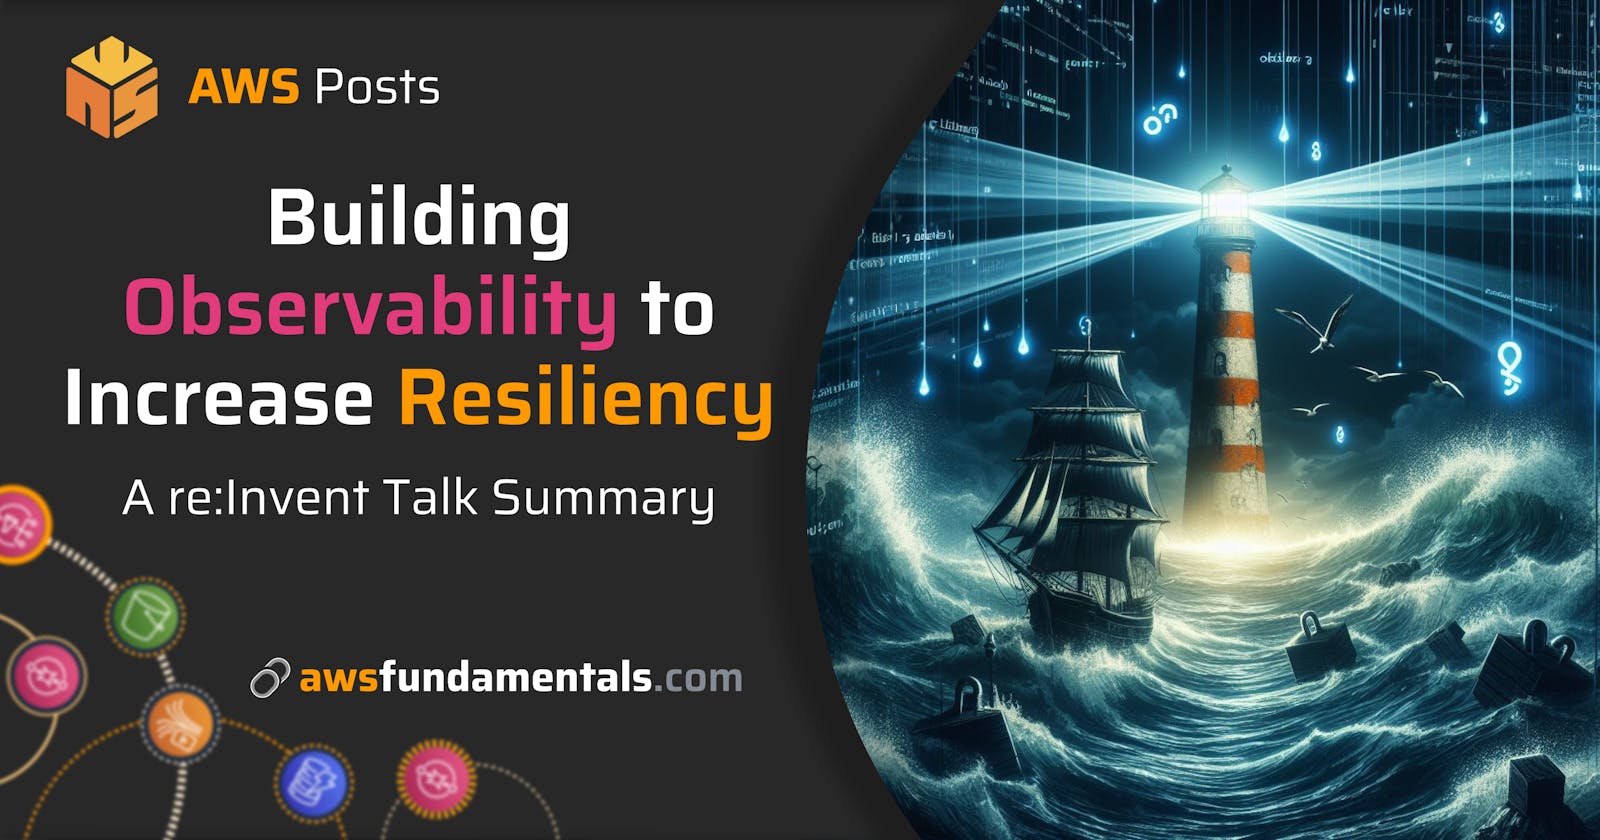 Building Observability to Increase Resiliency